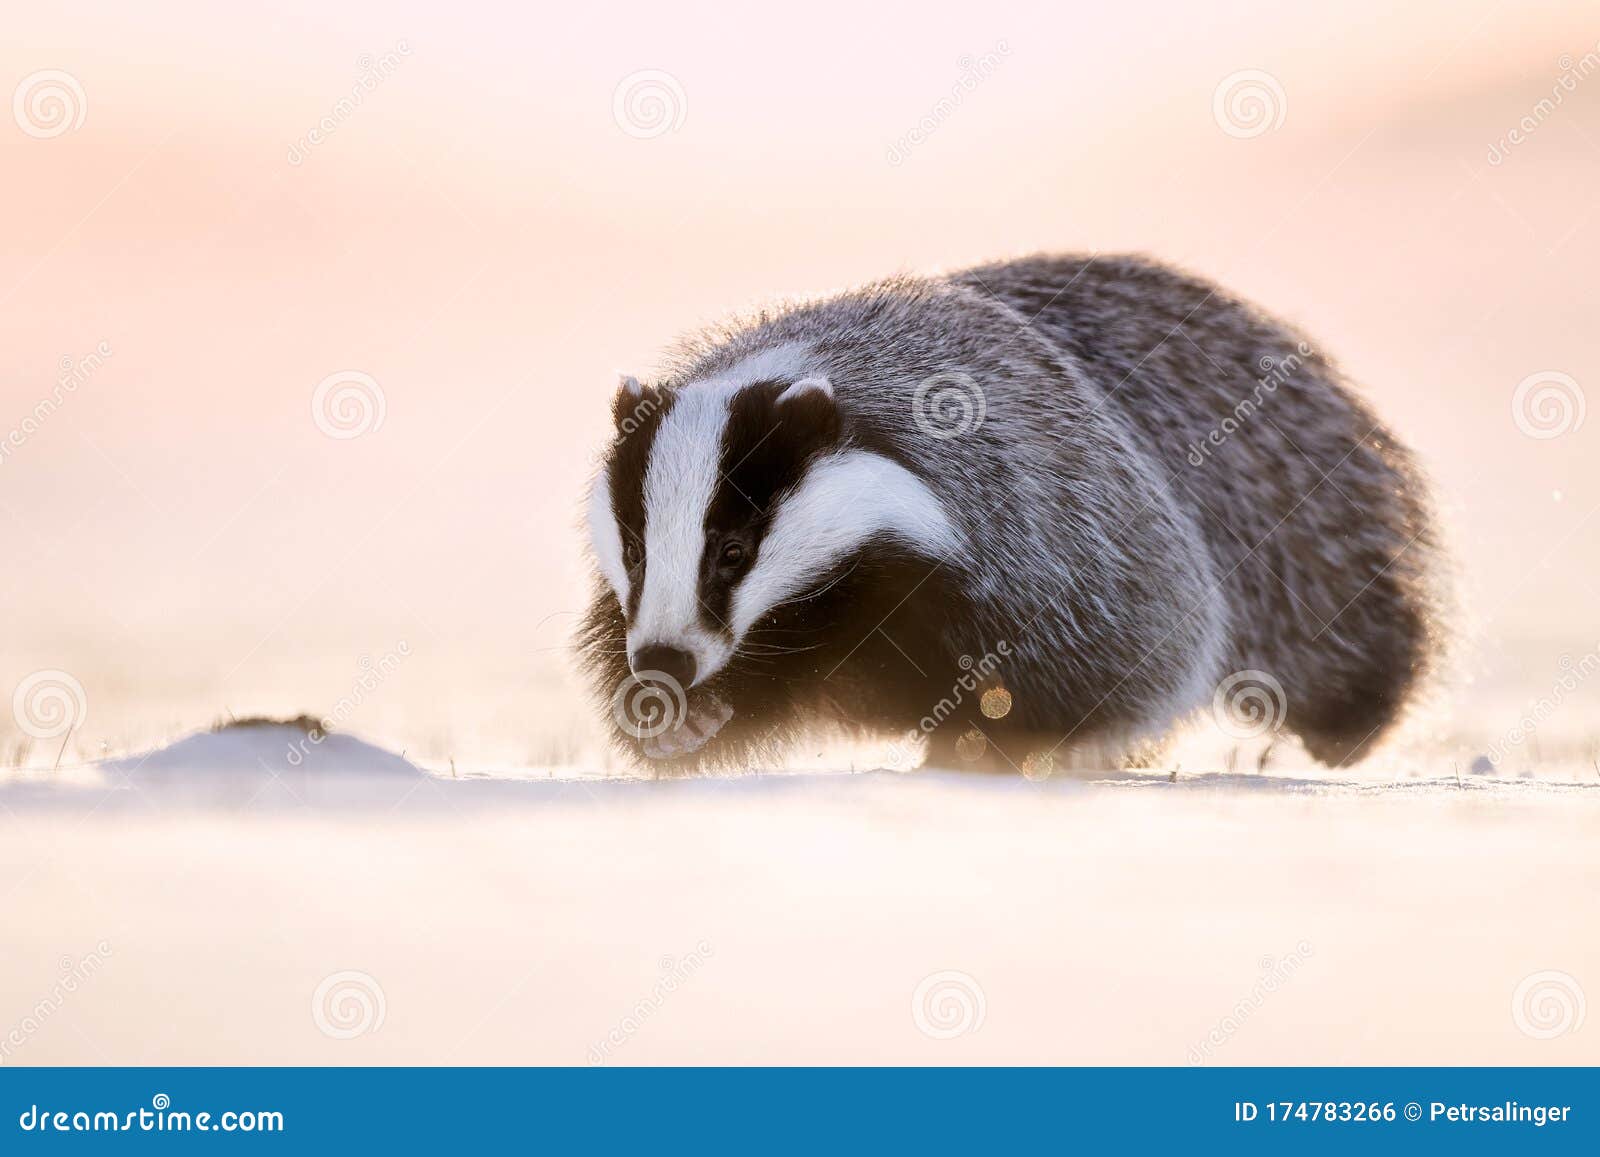 attractive winter scene with badger. european badger & x28;meles meles& x29; running on the snow. animal in nature habitat